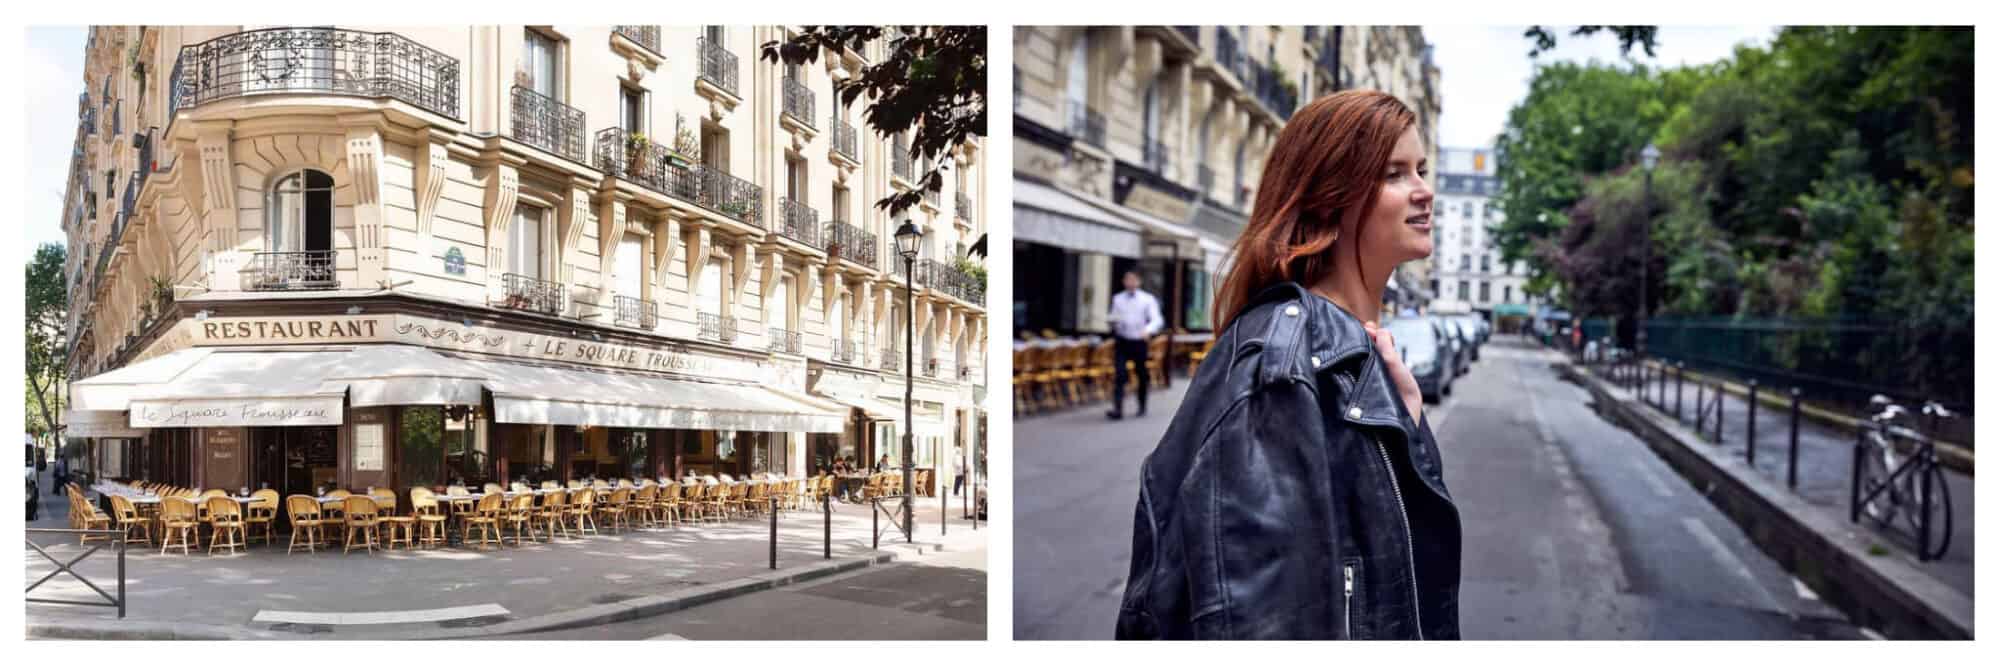 Left: Restaurant Square Trousseau near Square Trousseau in Paris on a sunny summer day, Right: A woman walks on the street next to Square Trousseau in Paris